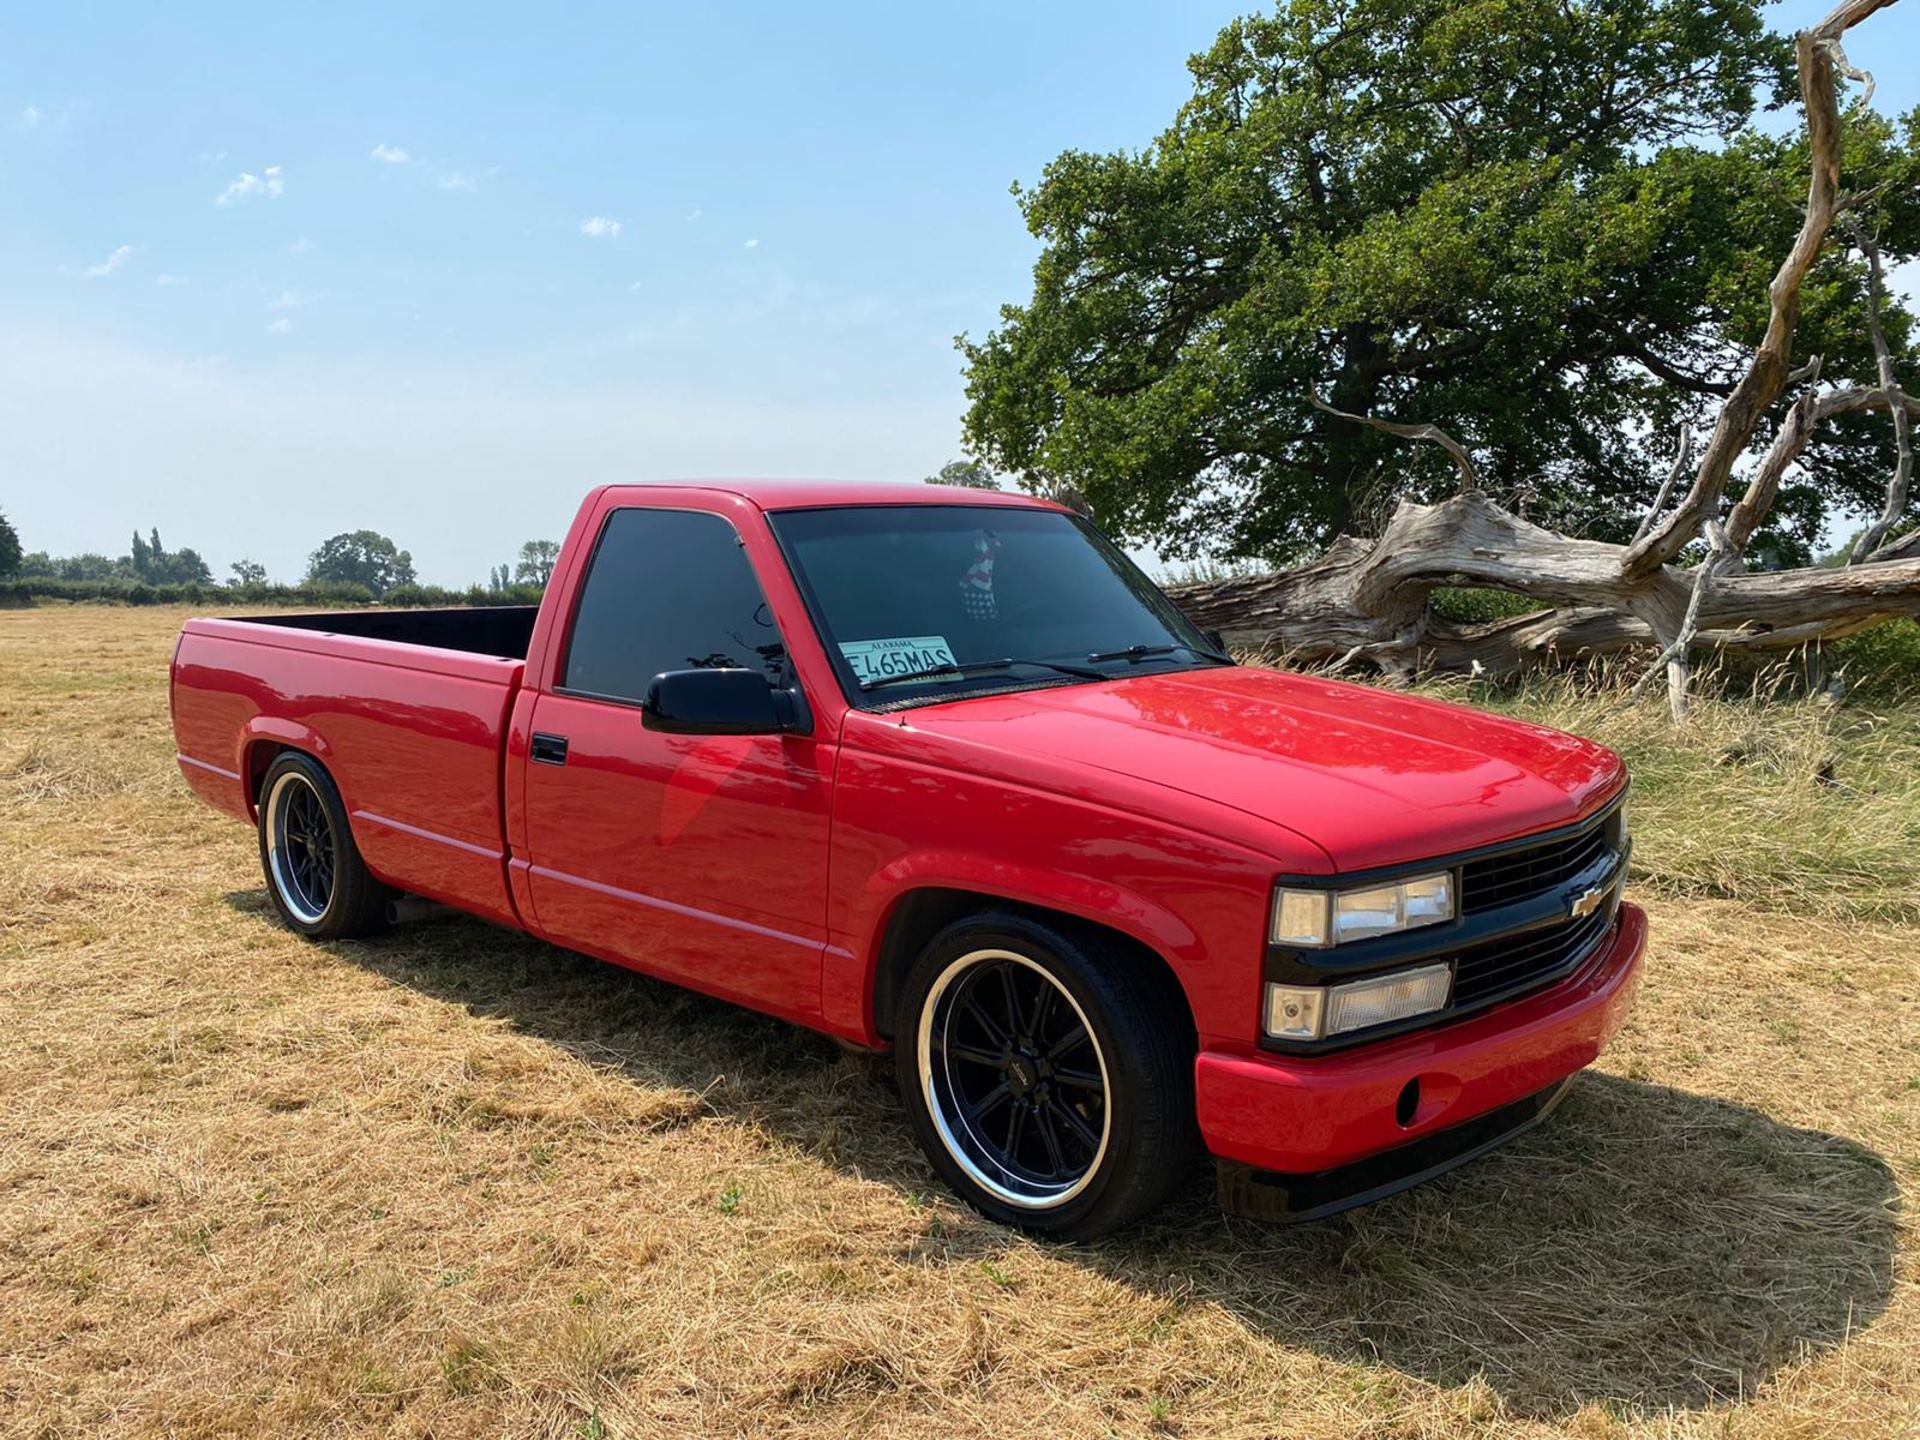 Super Red 1988 Chevrolet C1500 / OBS / GMT-400 - Single cab long bed (8ft) - Image 7 of 15